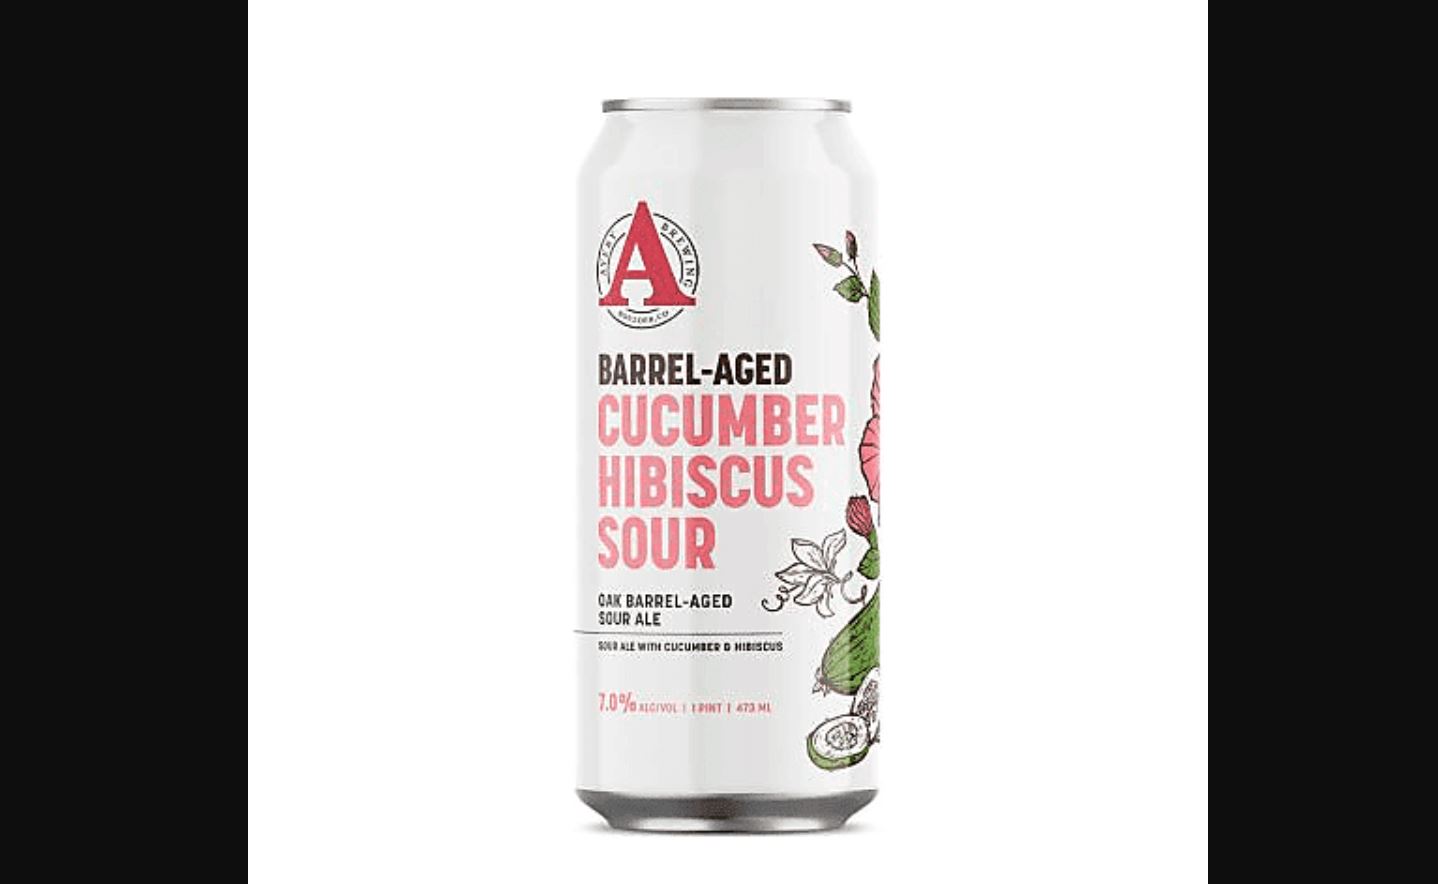 Avery Barrel Aged Cucumber Hibiscus Sour